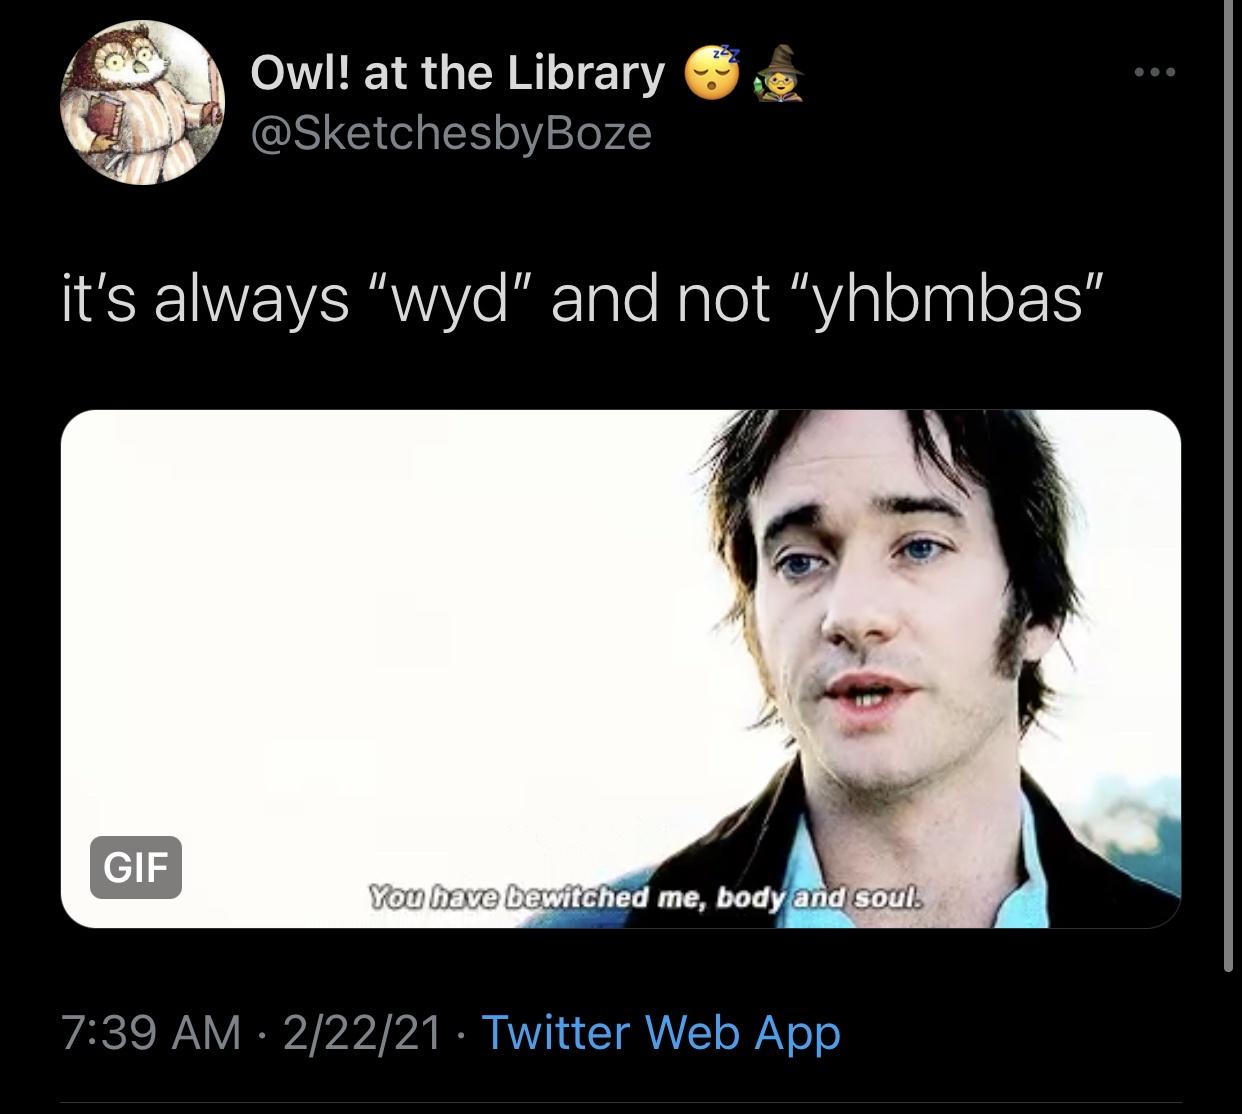 photo caption - Owl! at the Library it's always "wyd" and not "yhbmbas" Gif You have bewitched me, body and soul. 22221 Twitter Web App